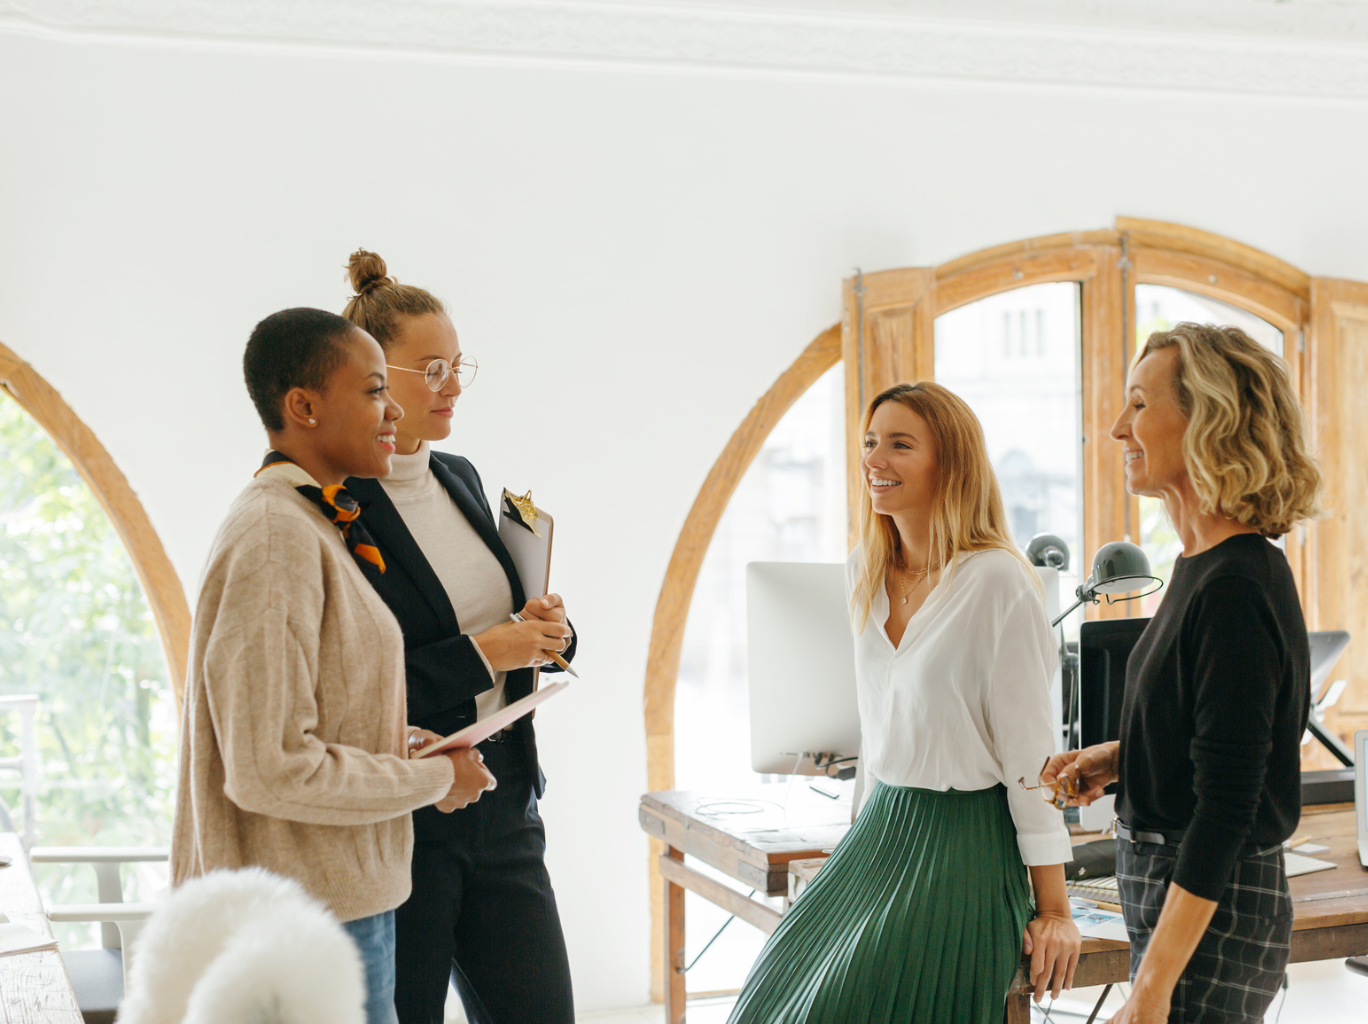 Group of female / women entrepreneurs successfully networking together as part of an Ask Nancy article